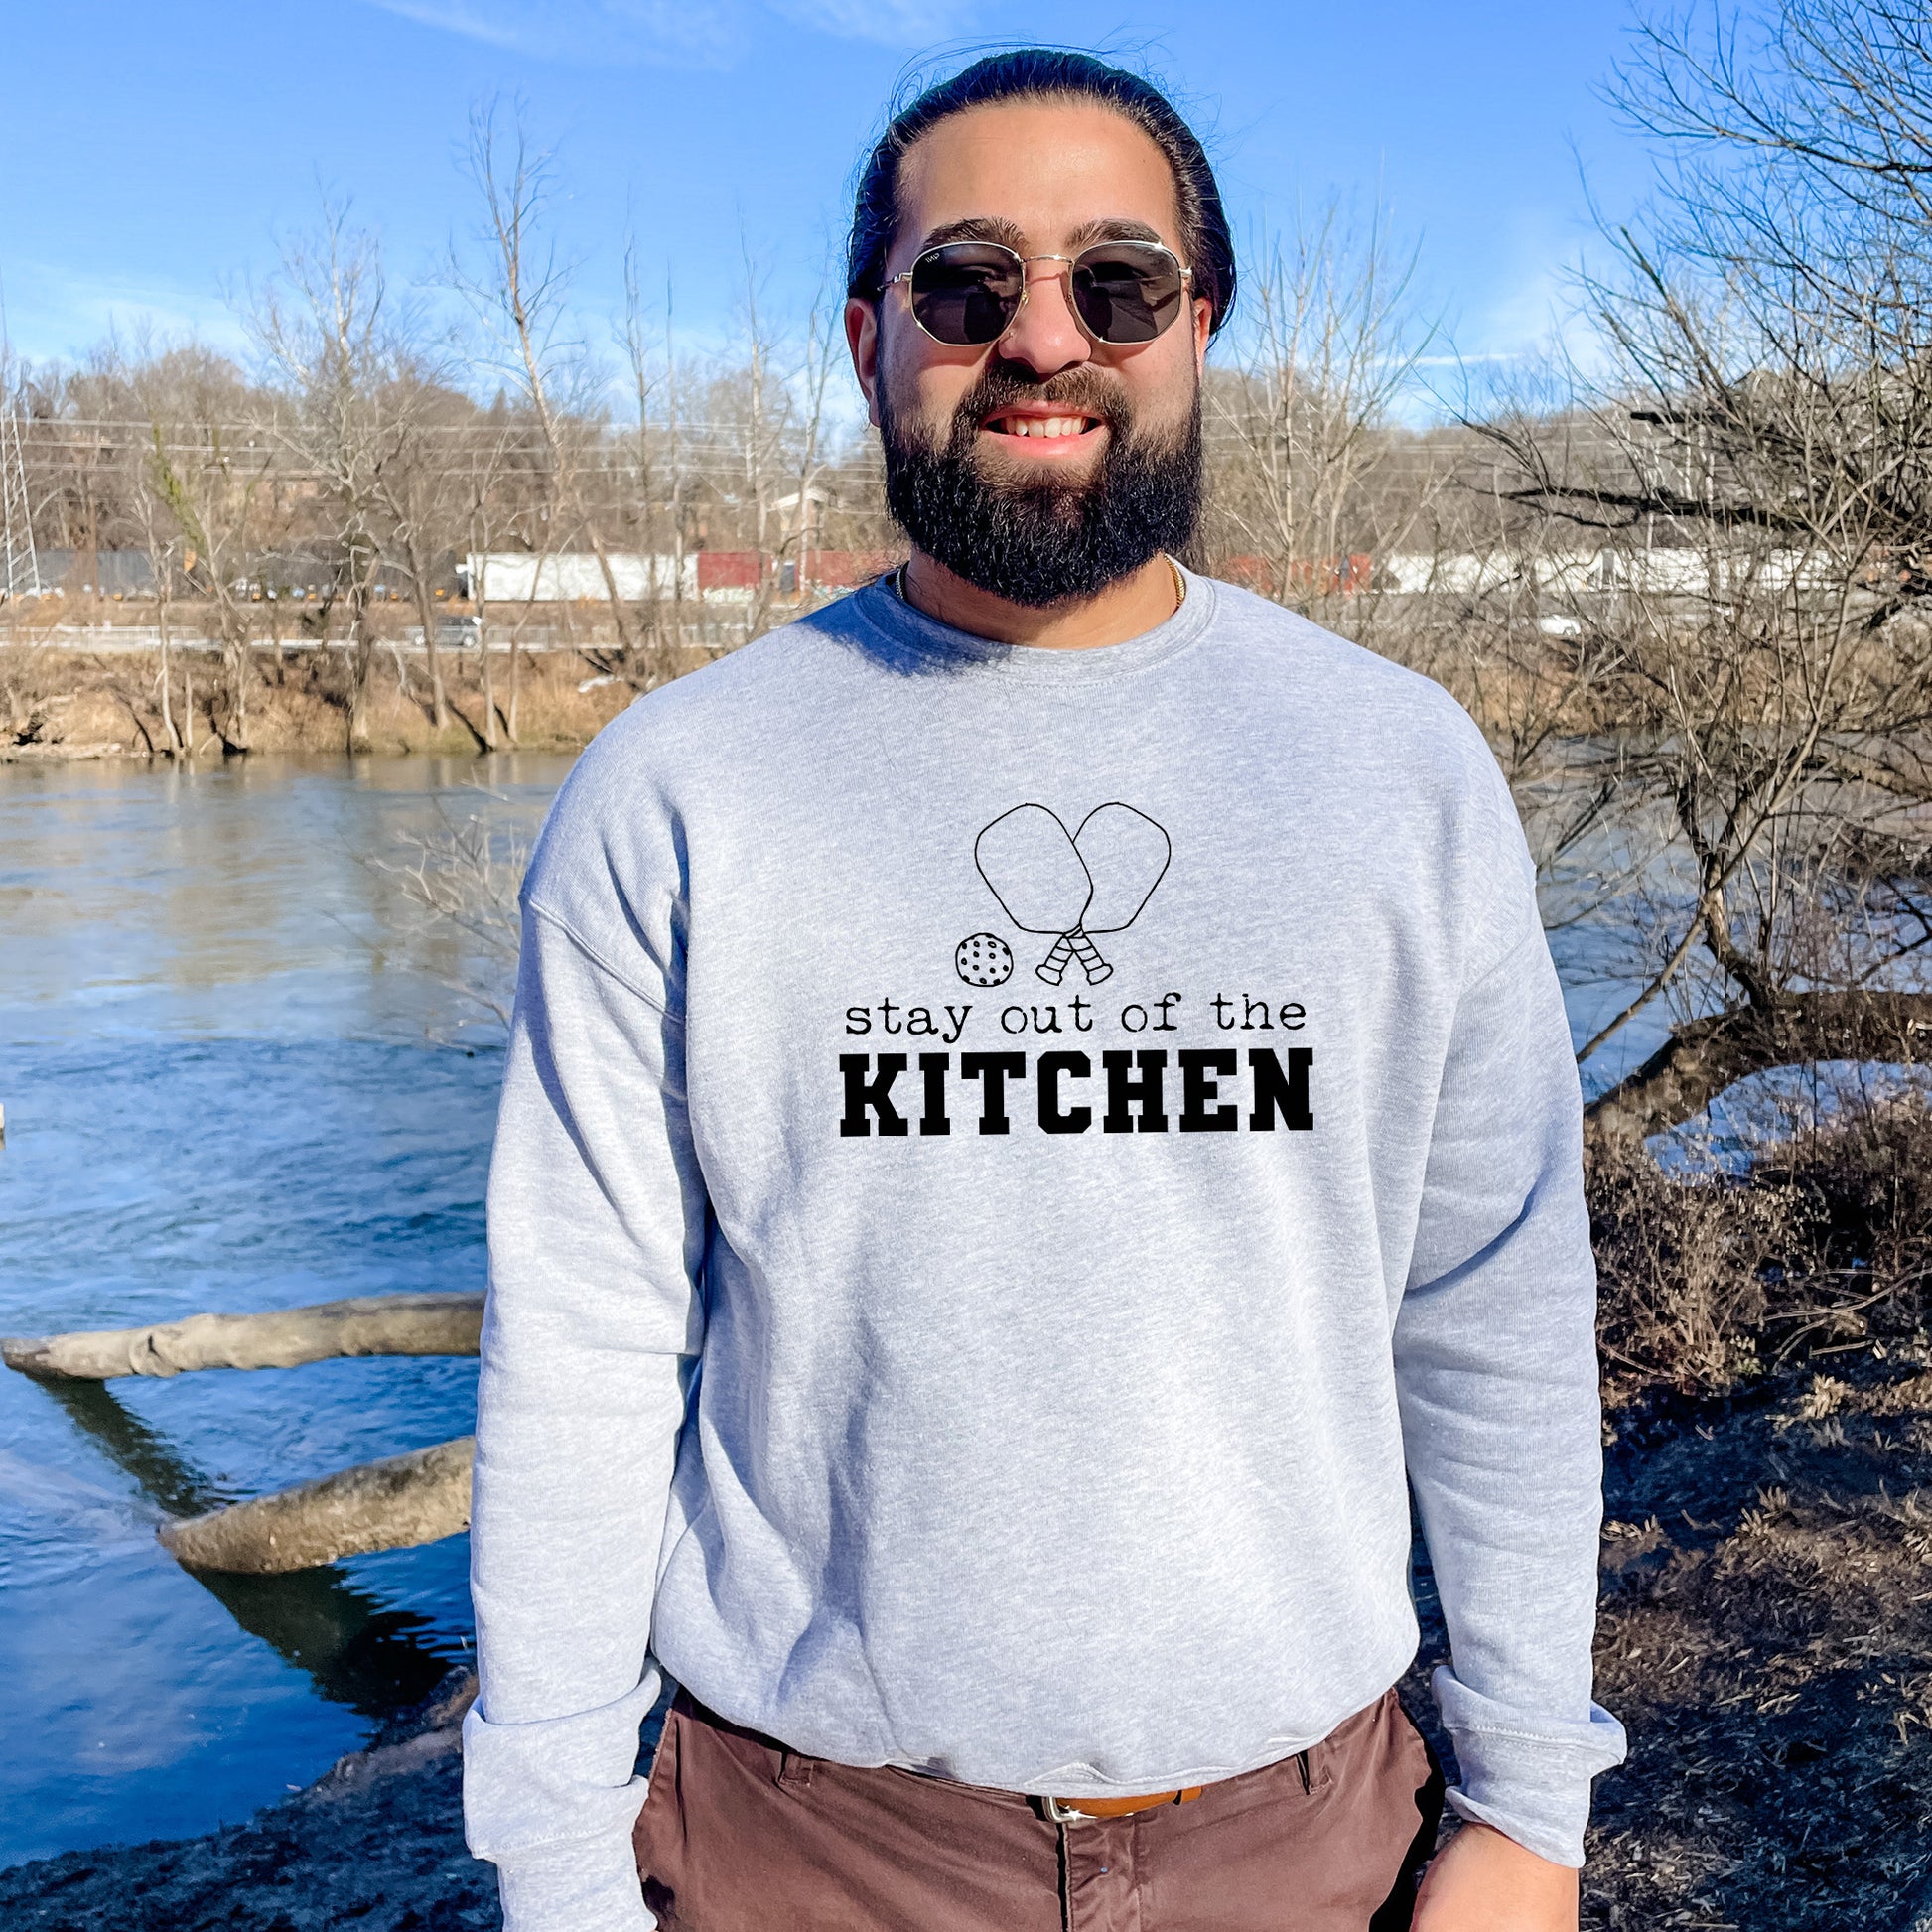 a man wearing a sweatshirt that says stay out of the kitchen